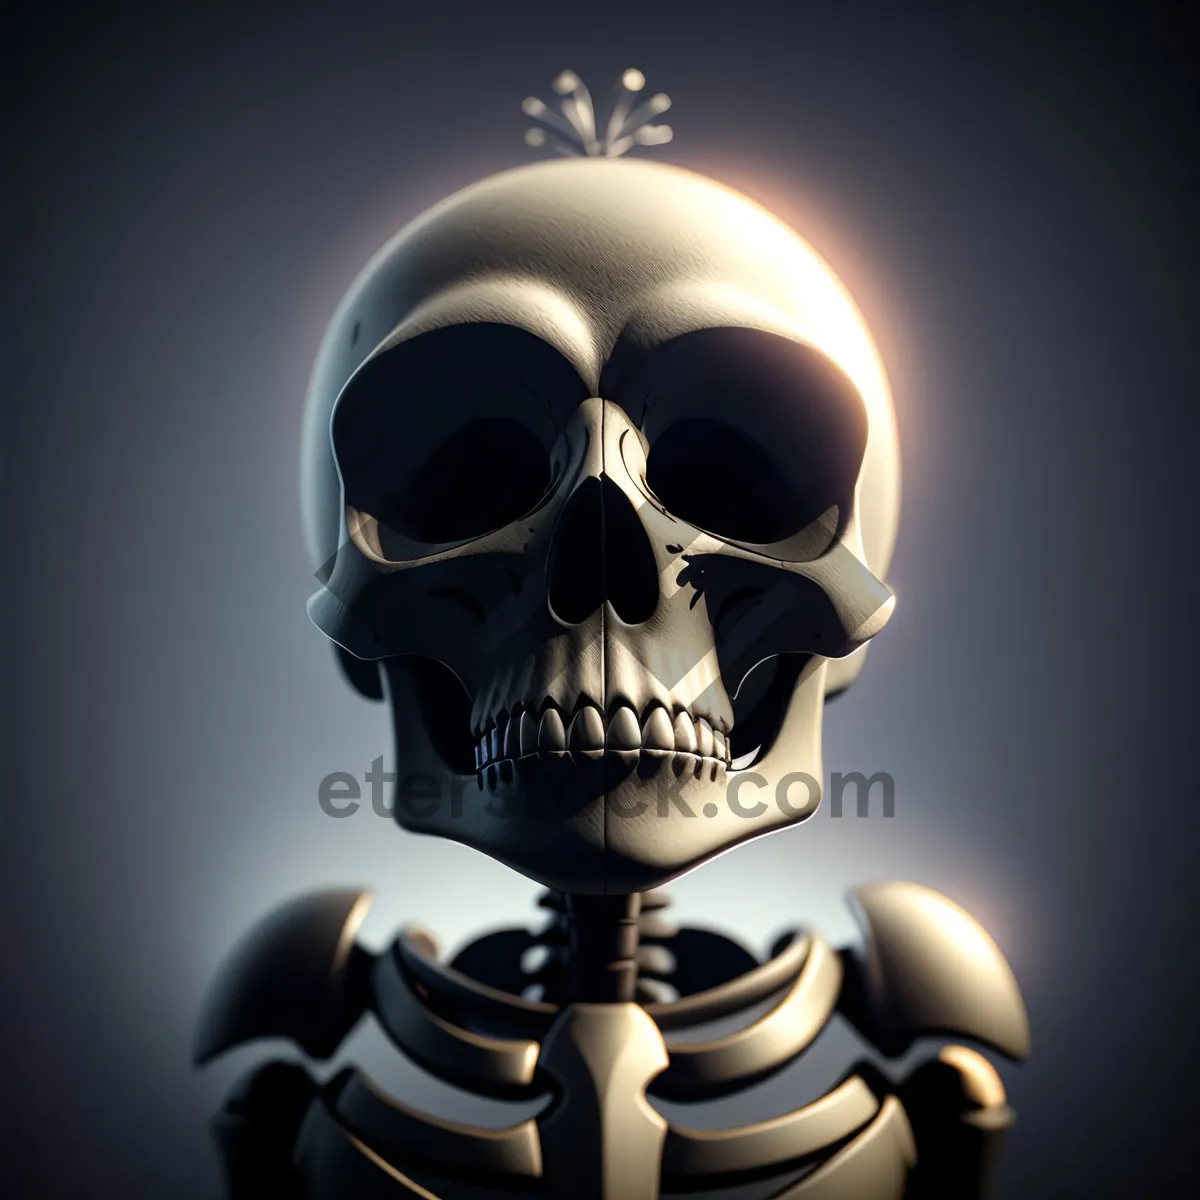 Picture of Eerie Pirate Skull Sculpture Symbolizing Death and Horror